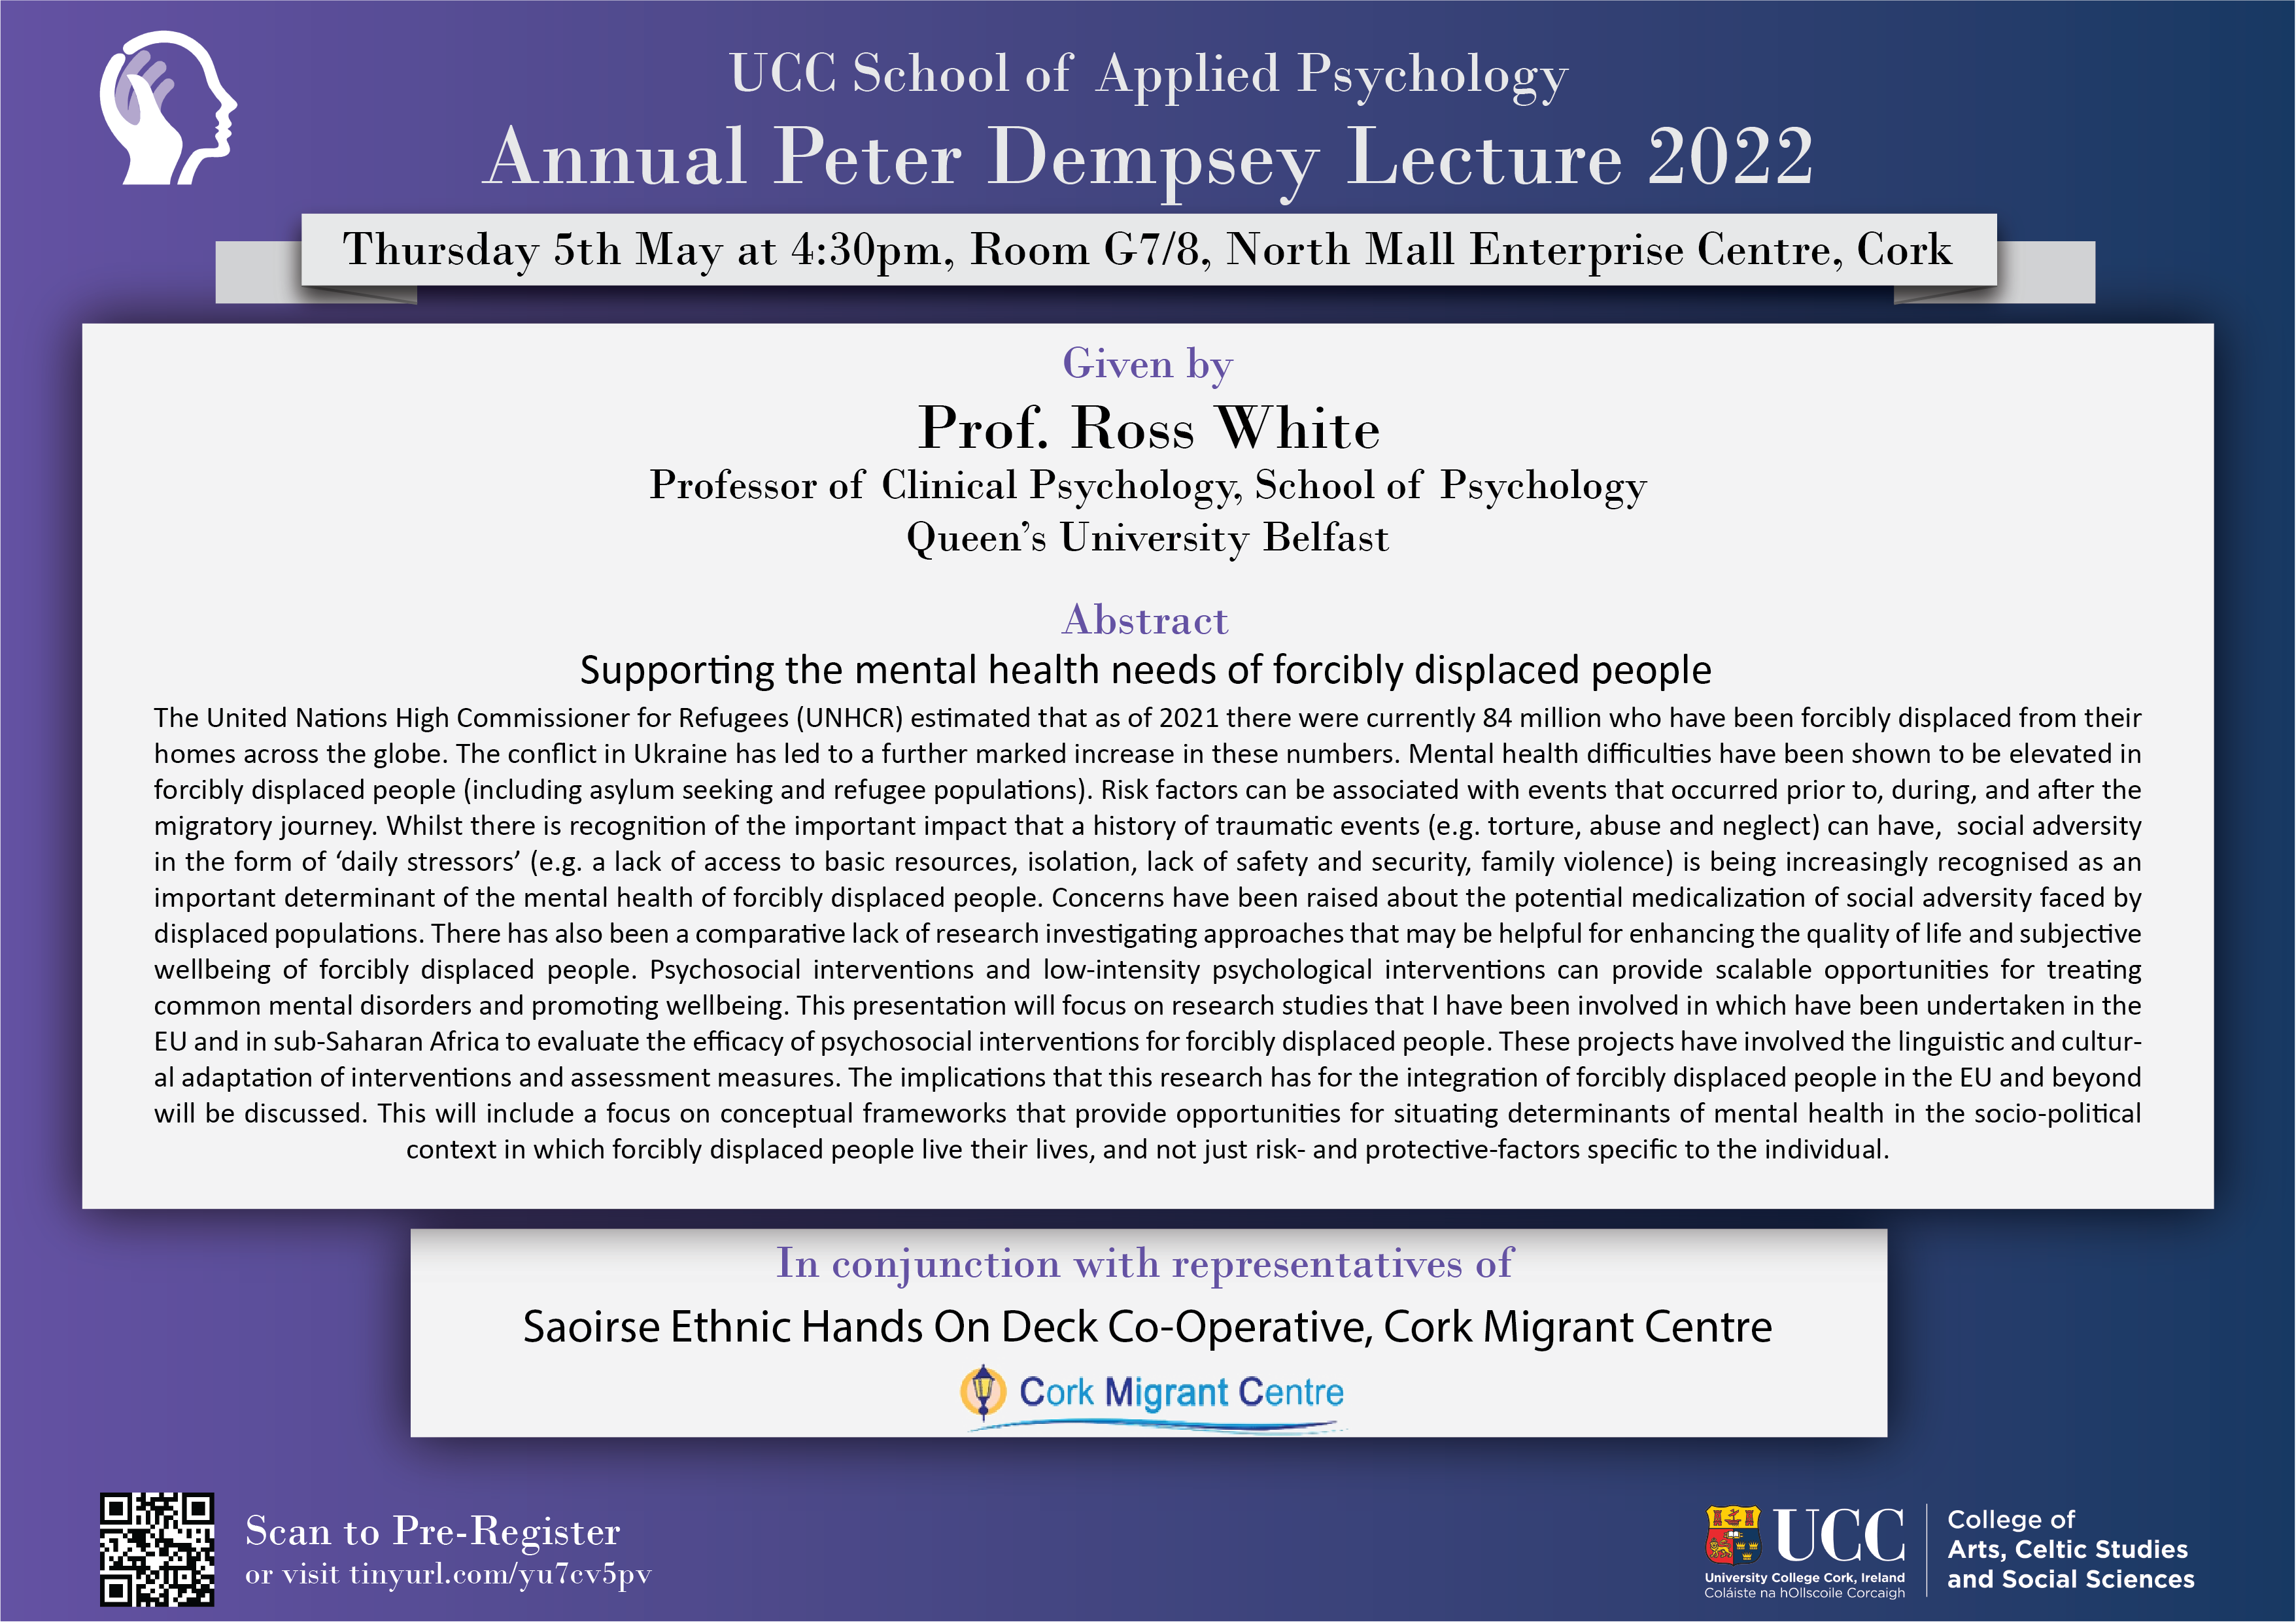 The Annual Peter Dempsey Lecture 2022